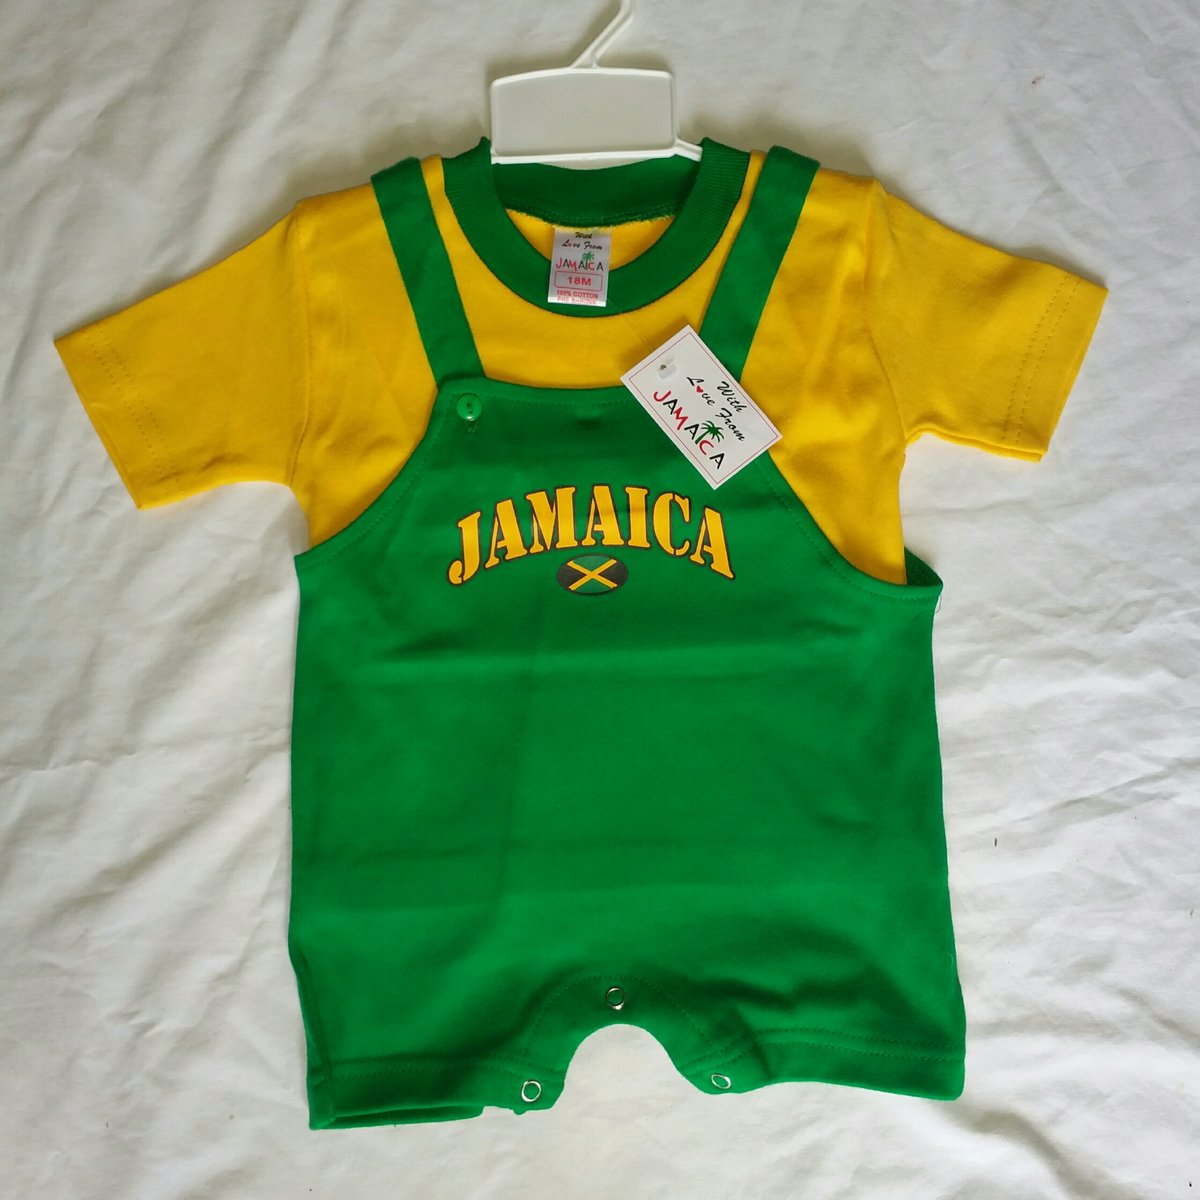 jamaican clothing for kids